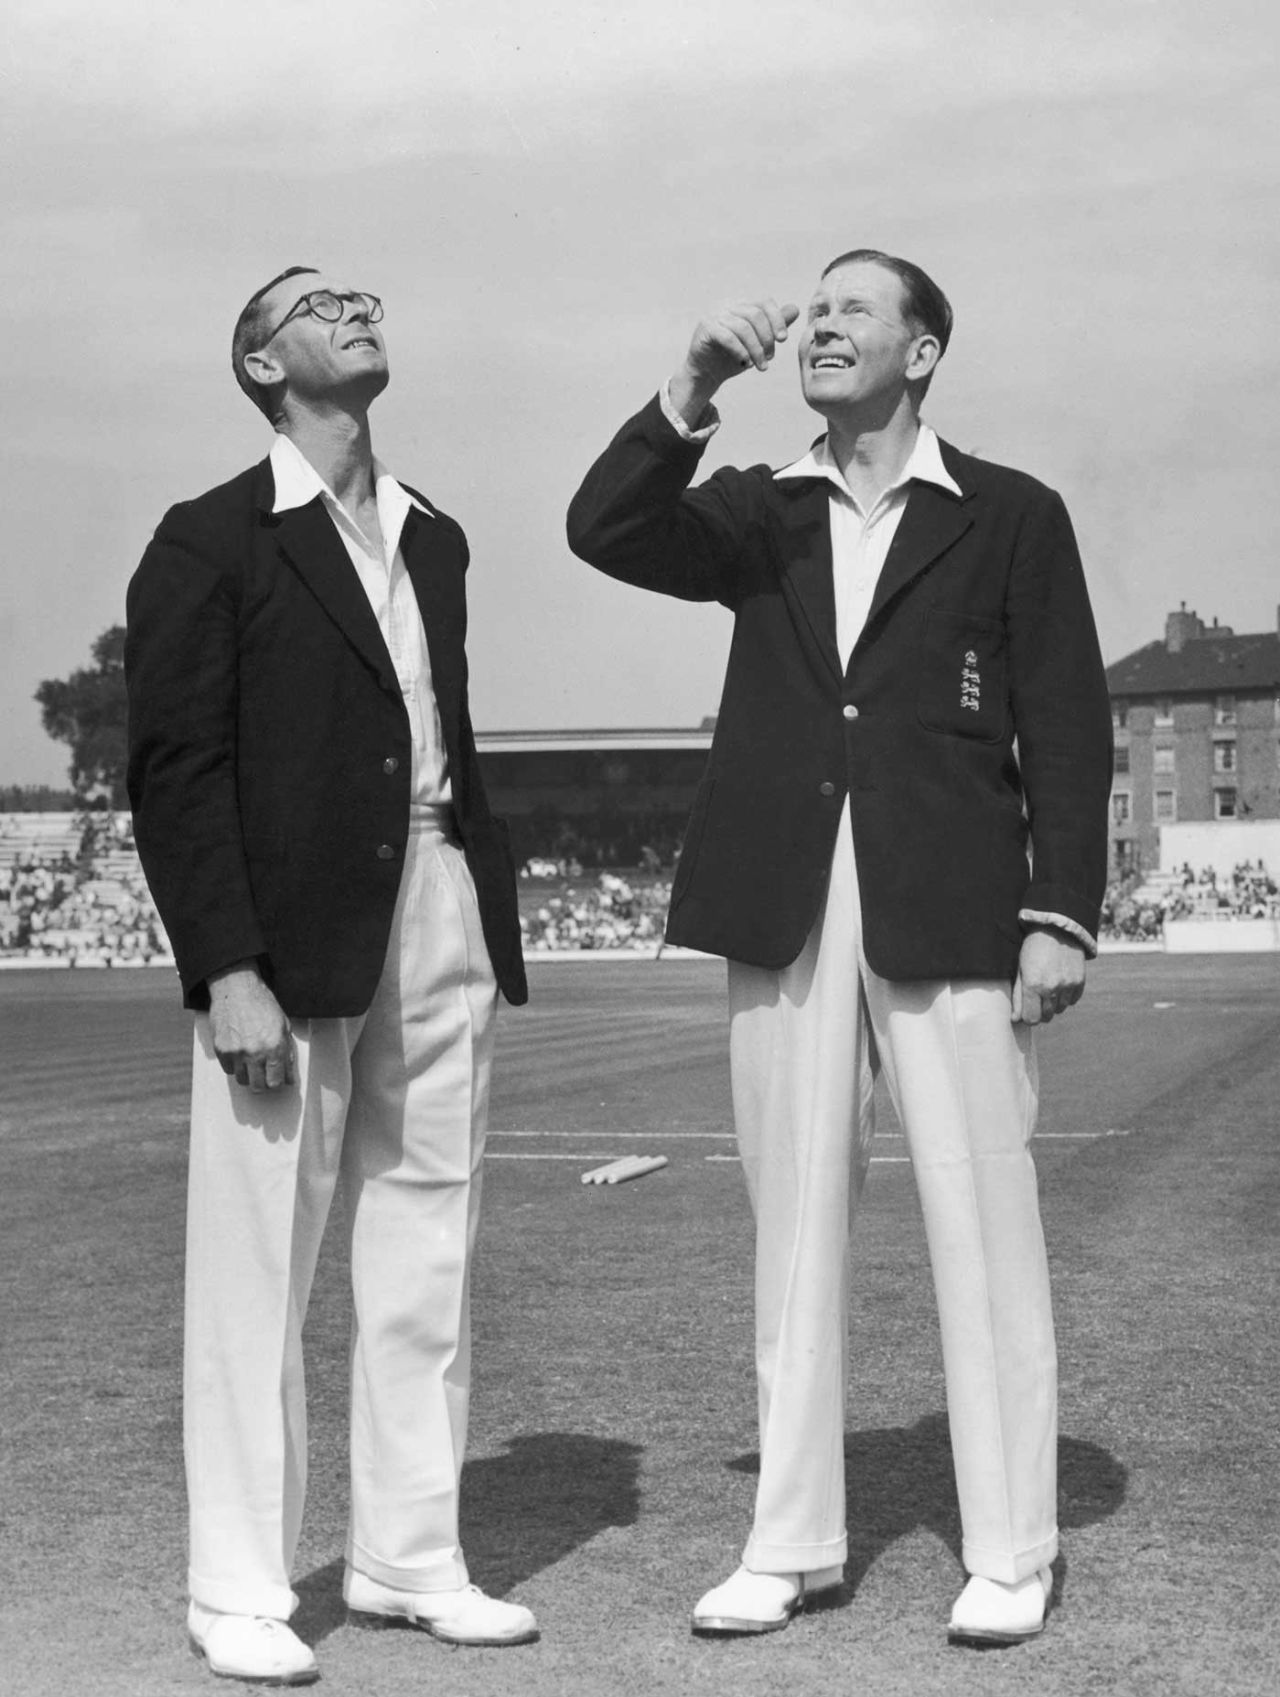 New Zealand captain Walter Hadlee watches as England captain Freddie Brown tosses the coin, England v New Zealand, 4th Test, The Oval, 1st day, August 13, 1949